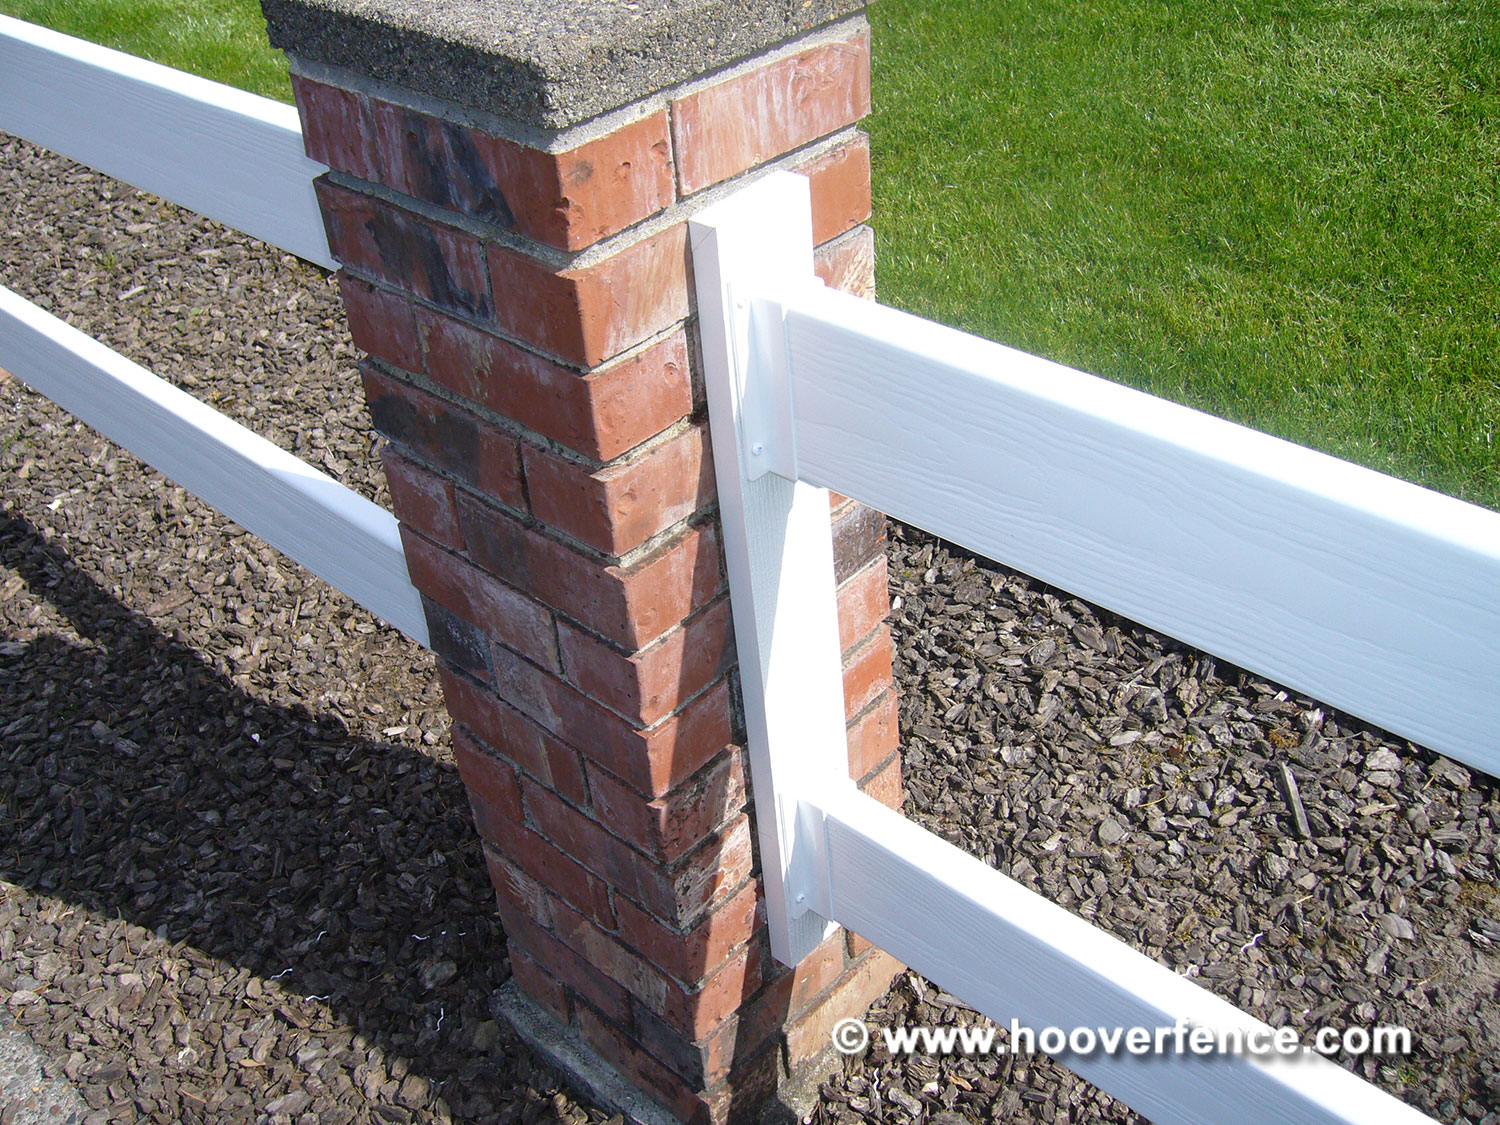 Customer Install - 2-Rail White CertaGrain Post and Rail Mounted on Brick Columns - Tigard, OR